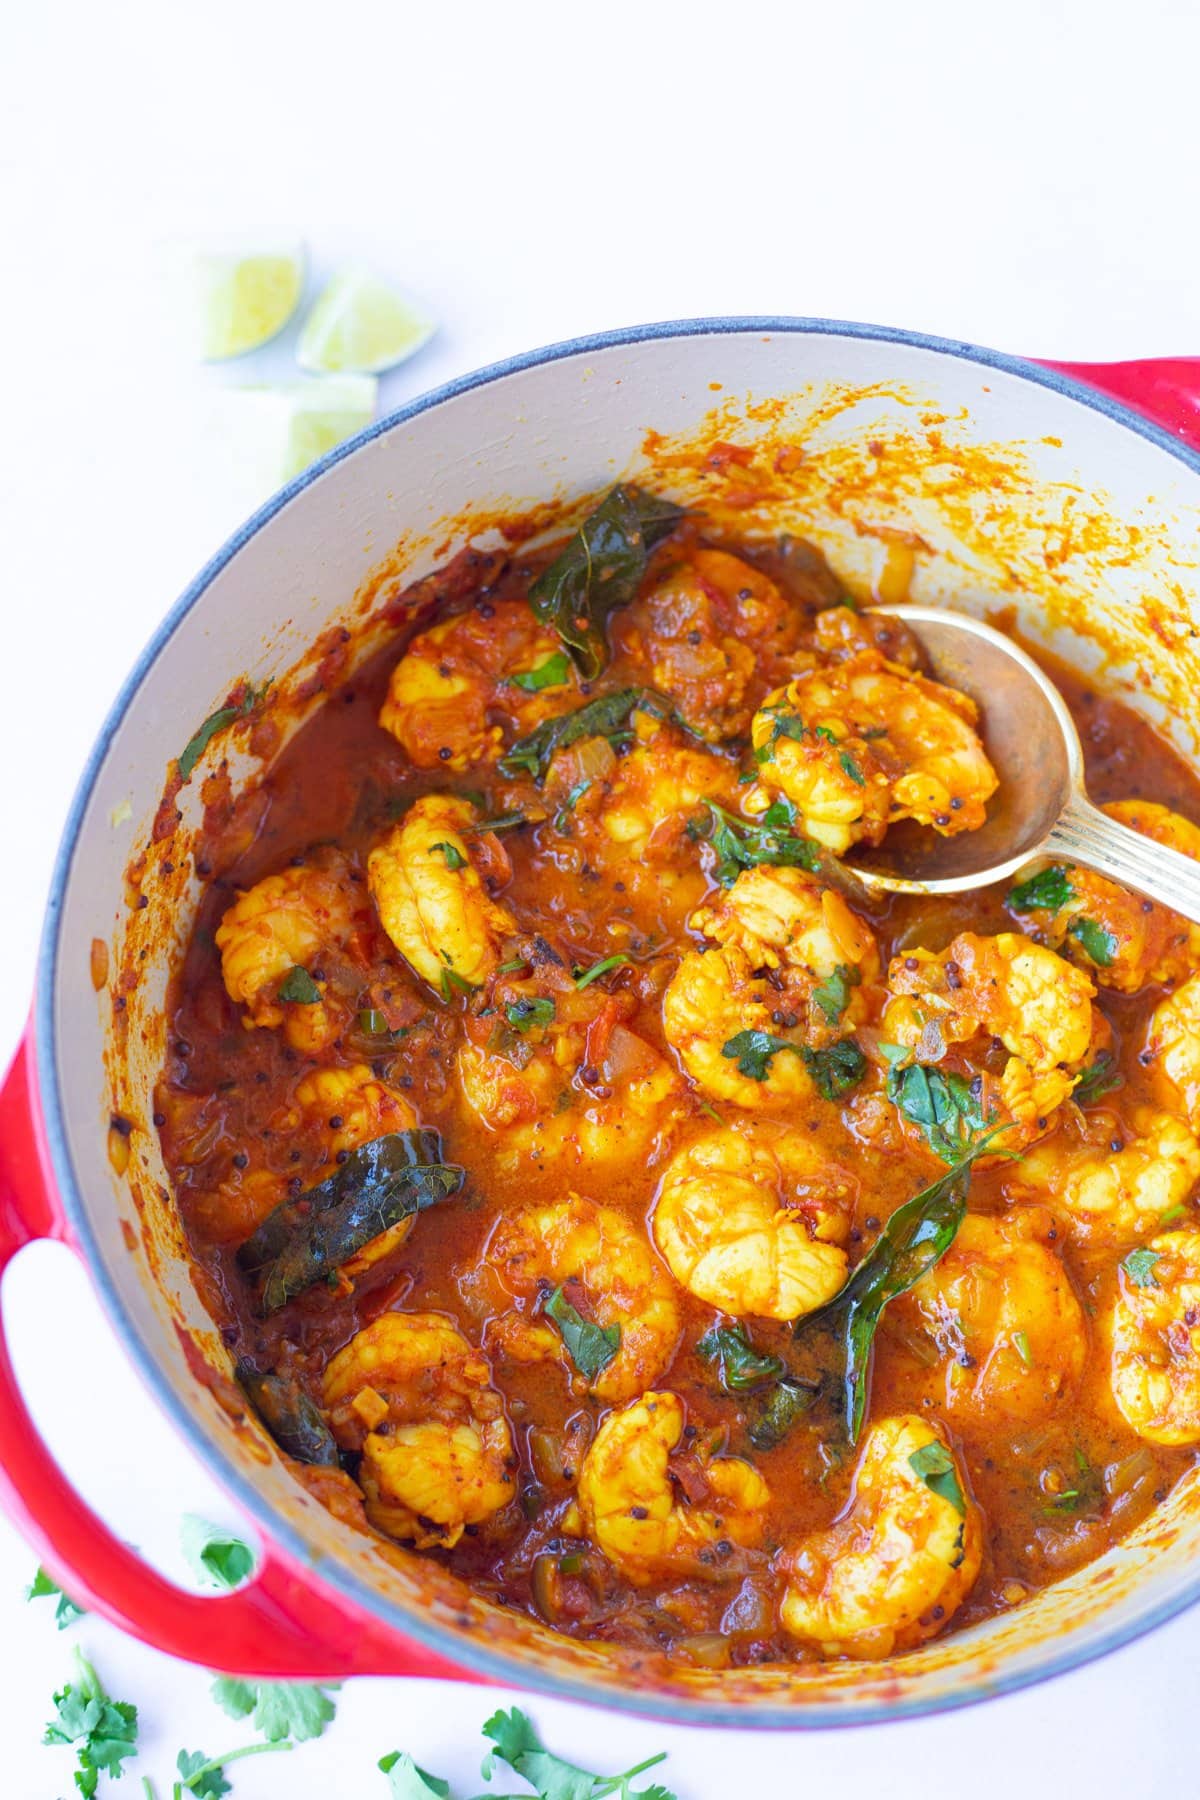 Shrimp Masala/Prawns masala curry in a pan garnished with cilantro leaves